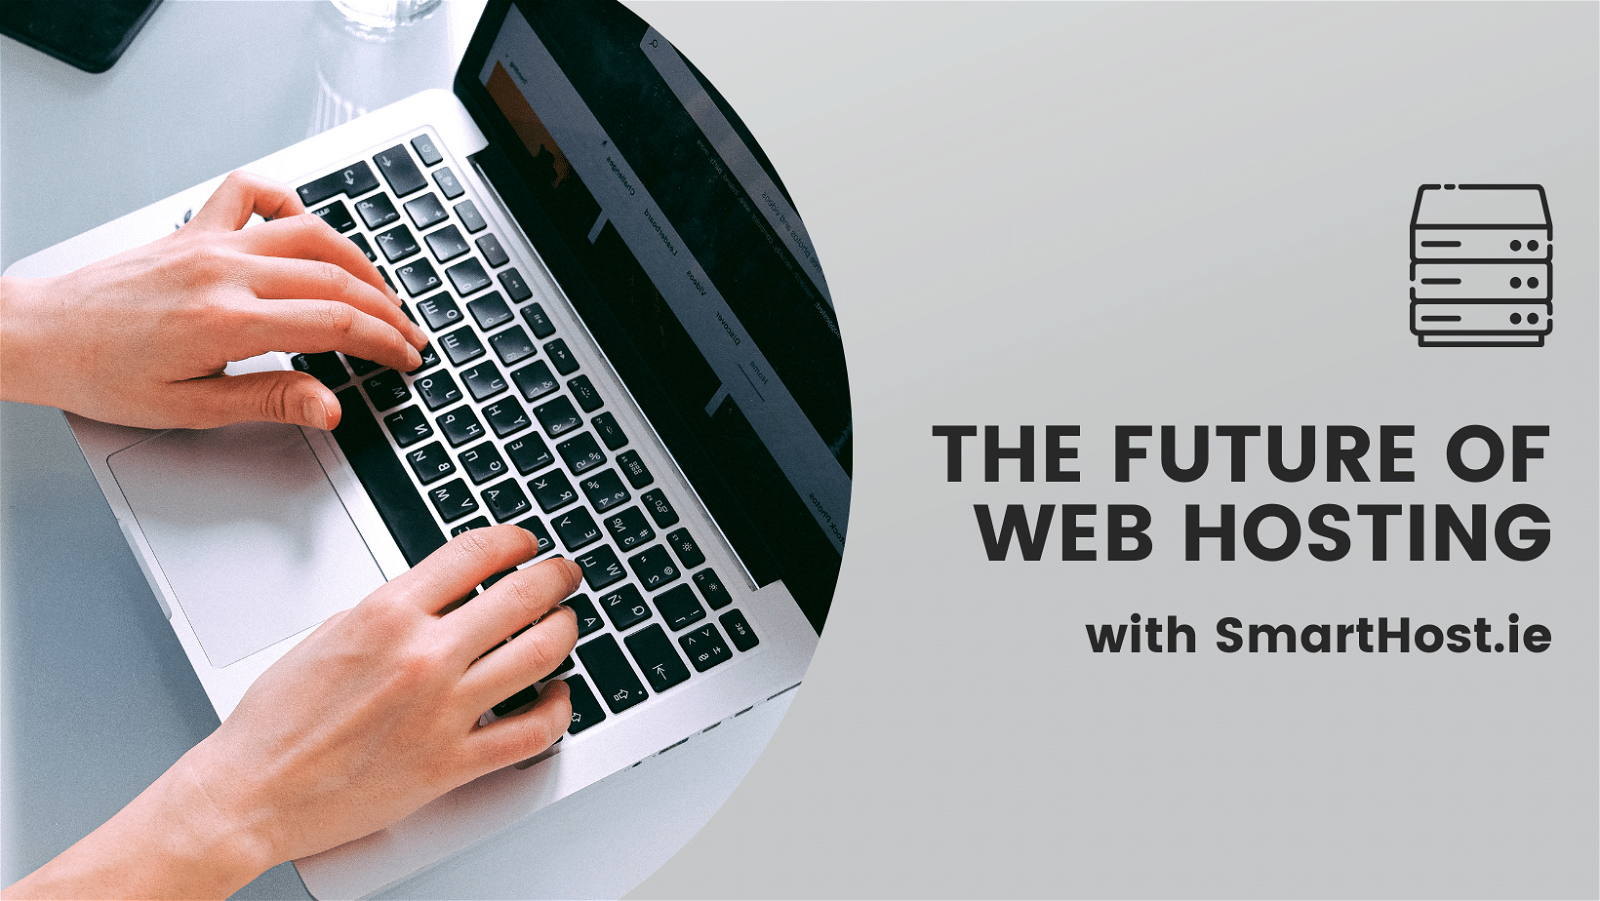 An individual is typing on a laptop with text overlay reading "THE FUTURE OF WEB HOSTING with SmartHost.ie". There's an icon of servers, indicating tech or internet services.